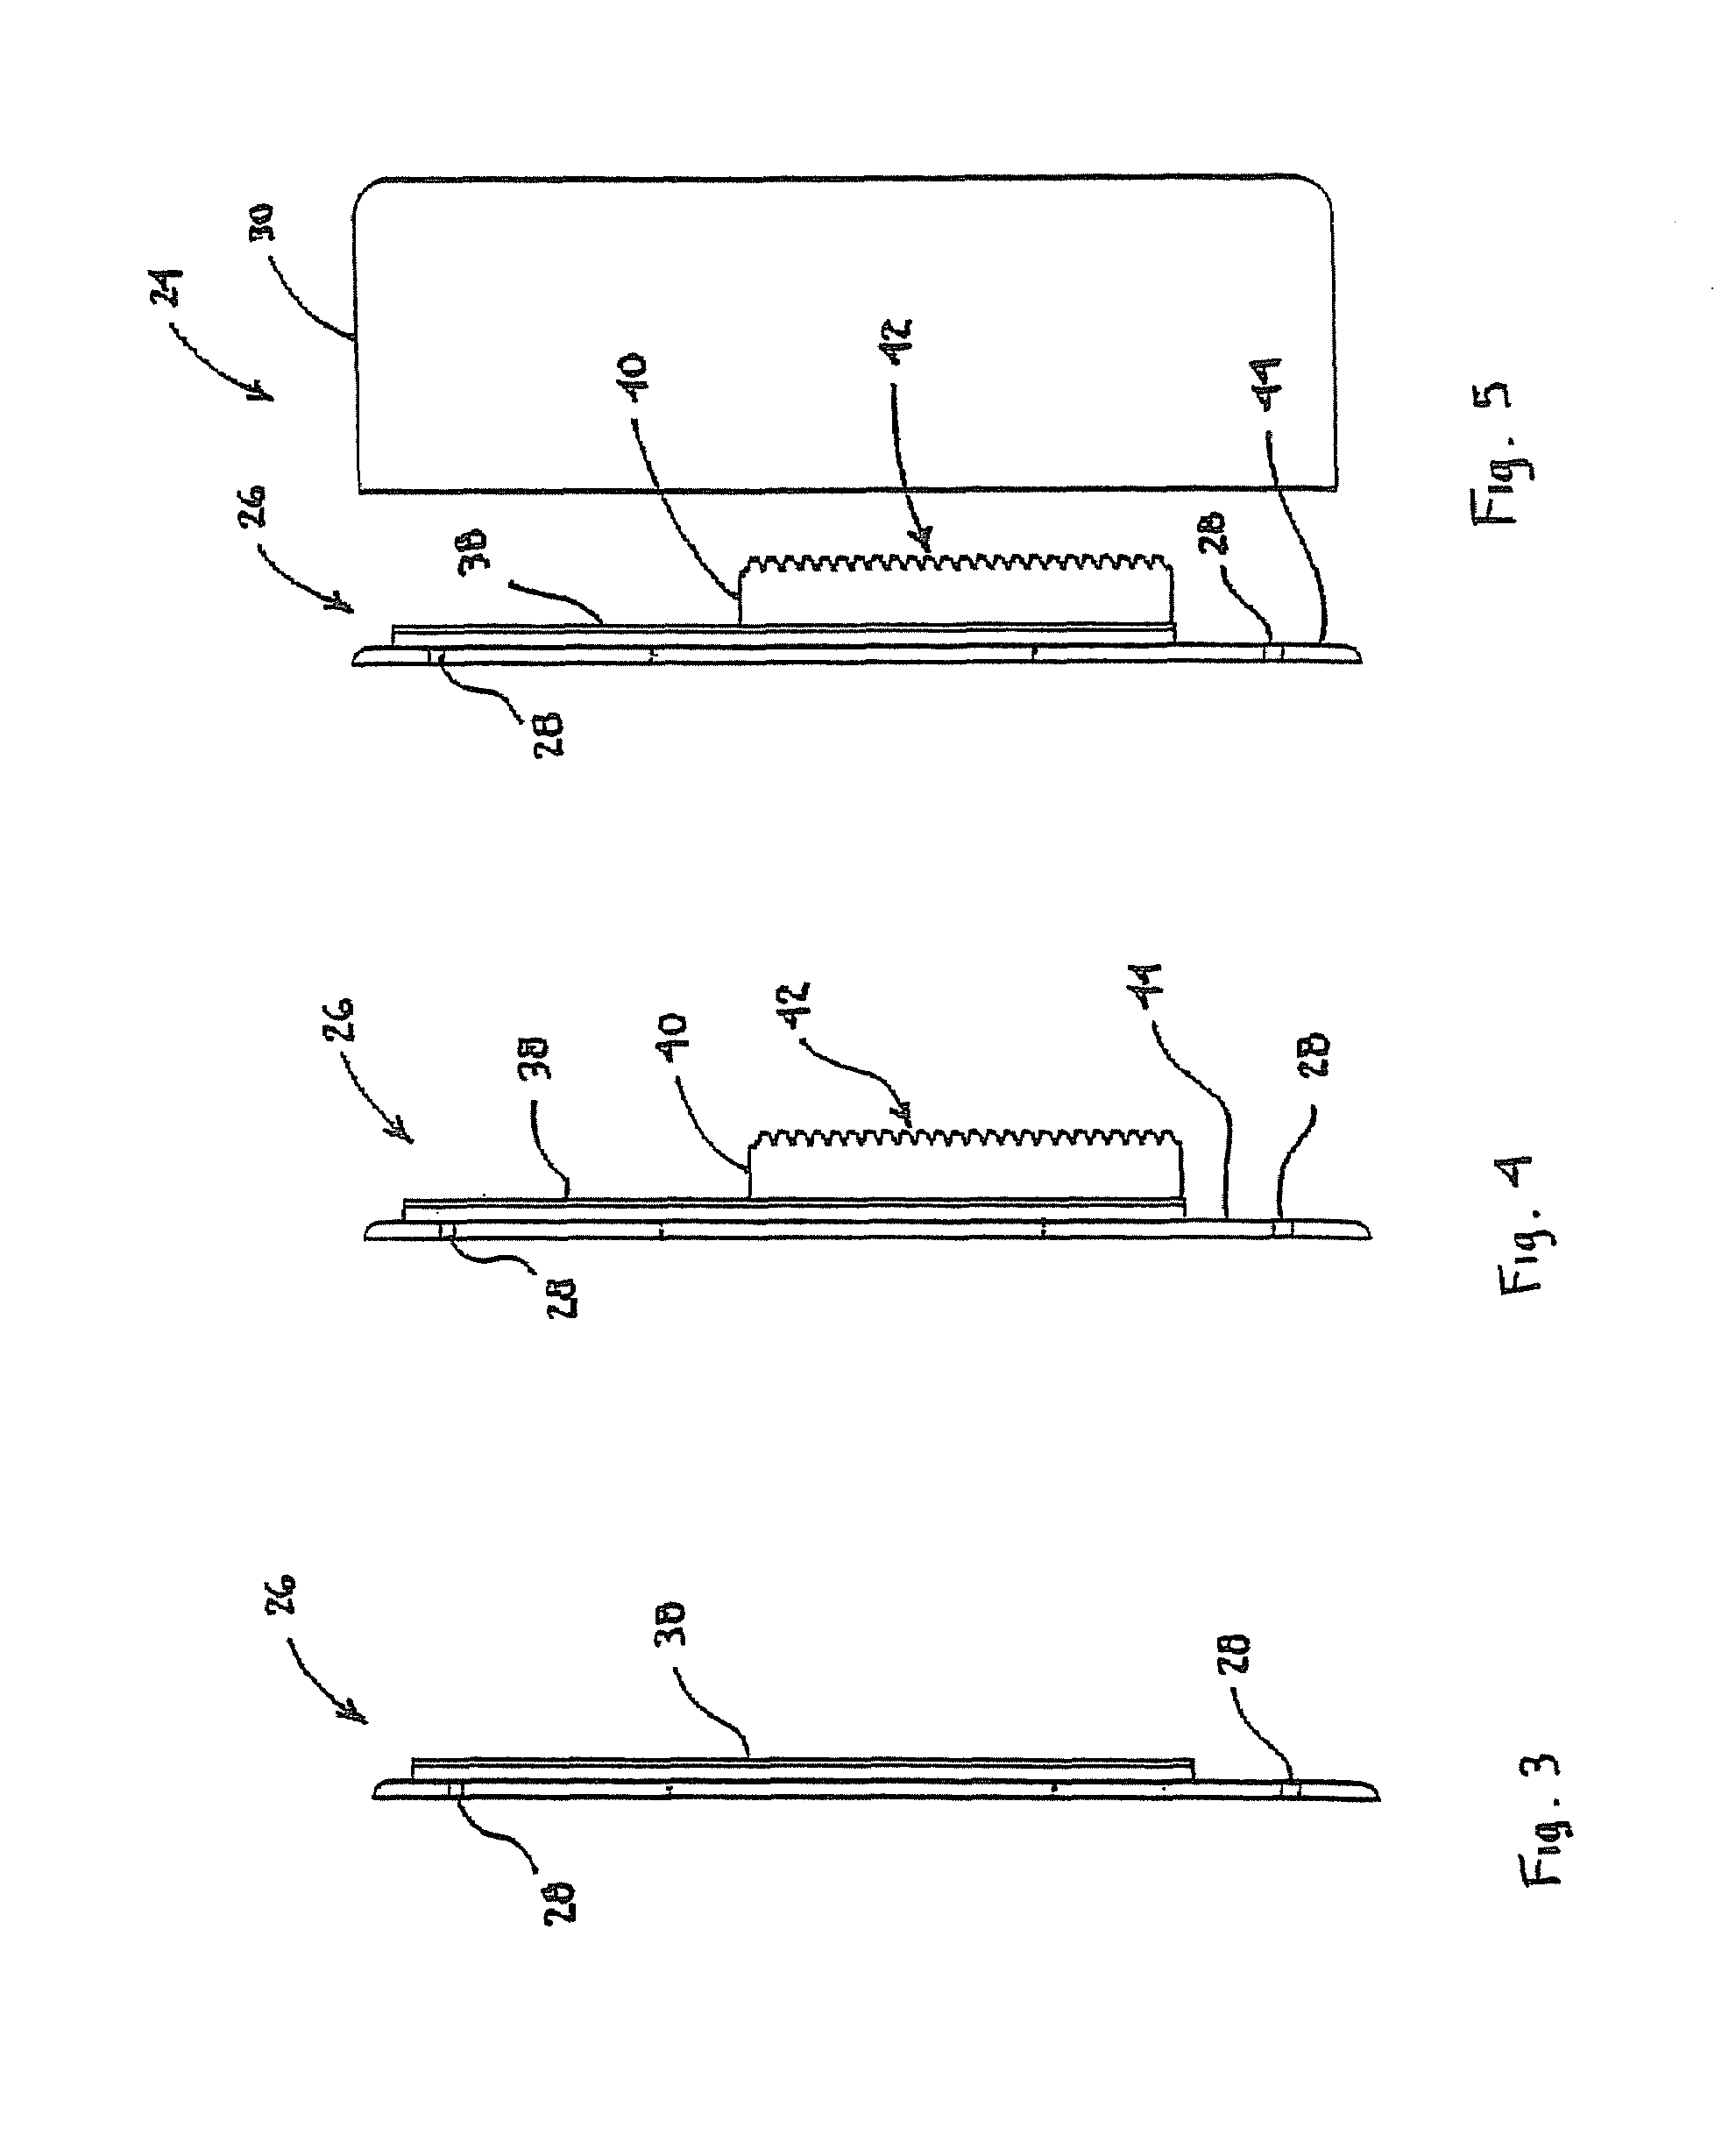 Switch actuation device